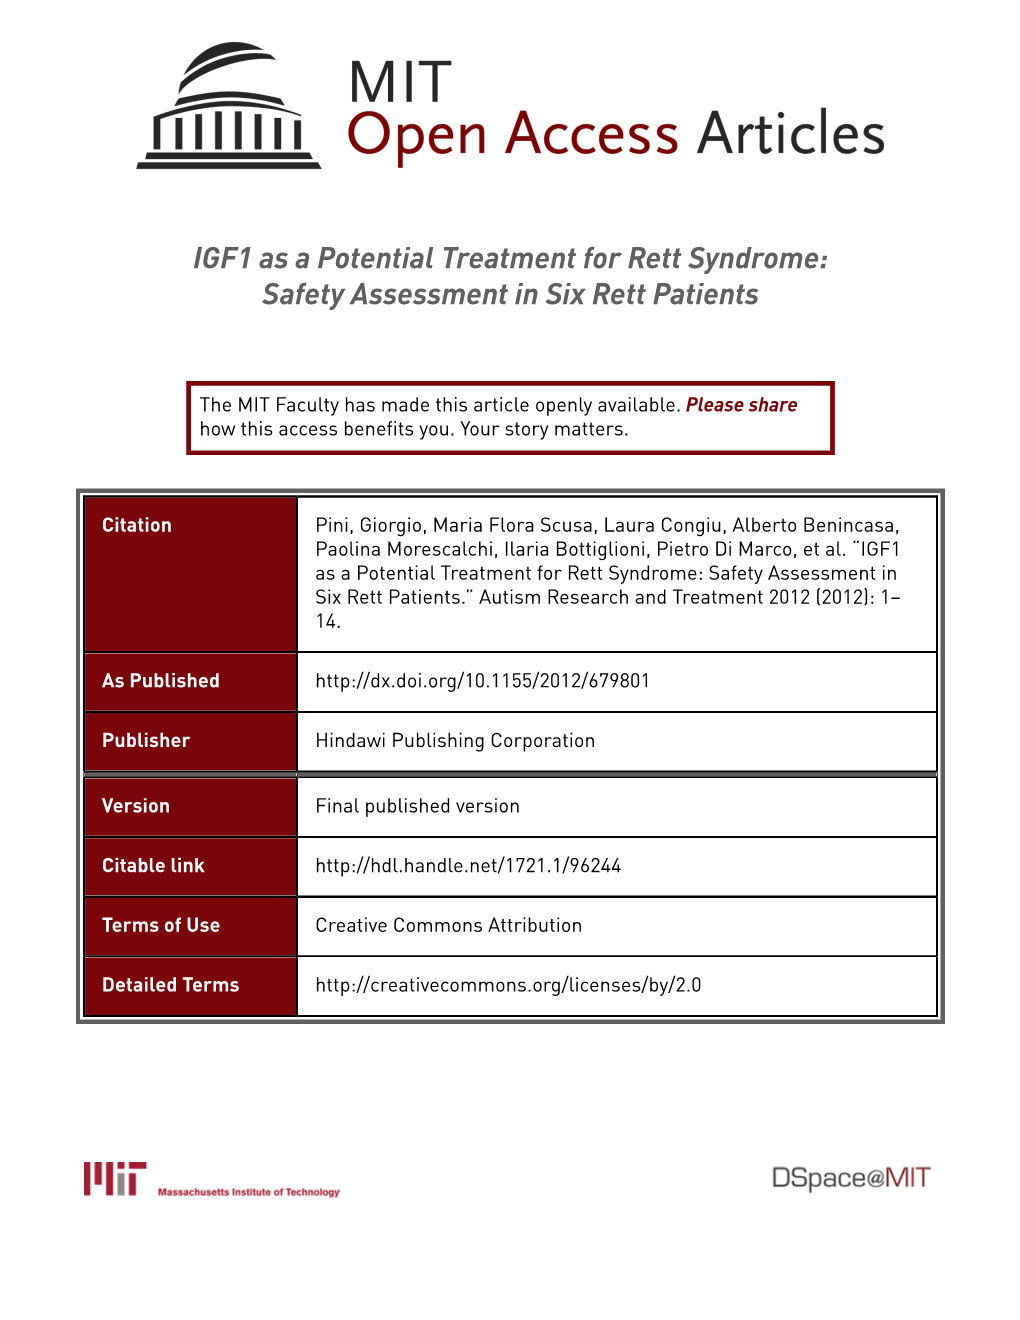 IGF1 As a Potential Treatment for Rett Syndrome: Safety Assessment in Six Rett Patients